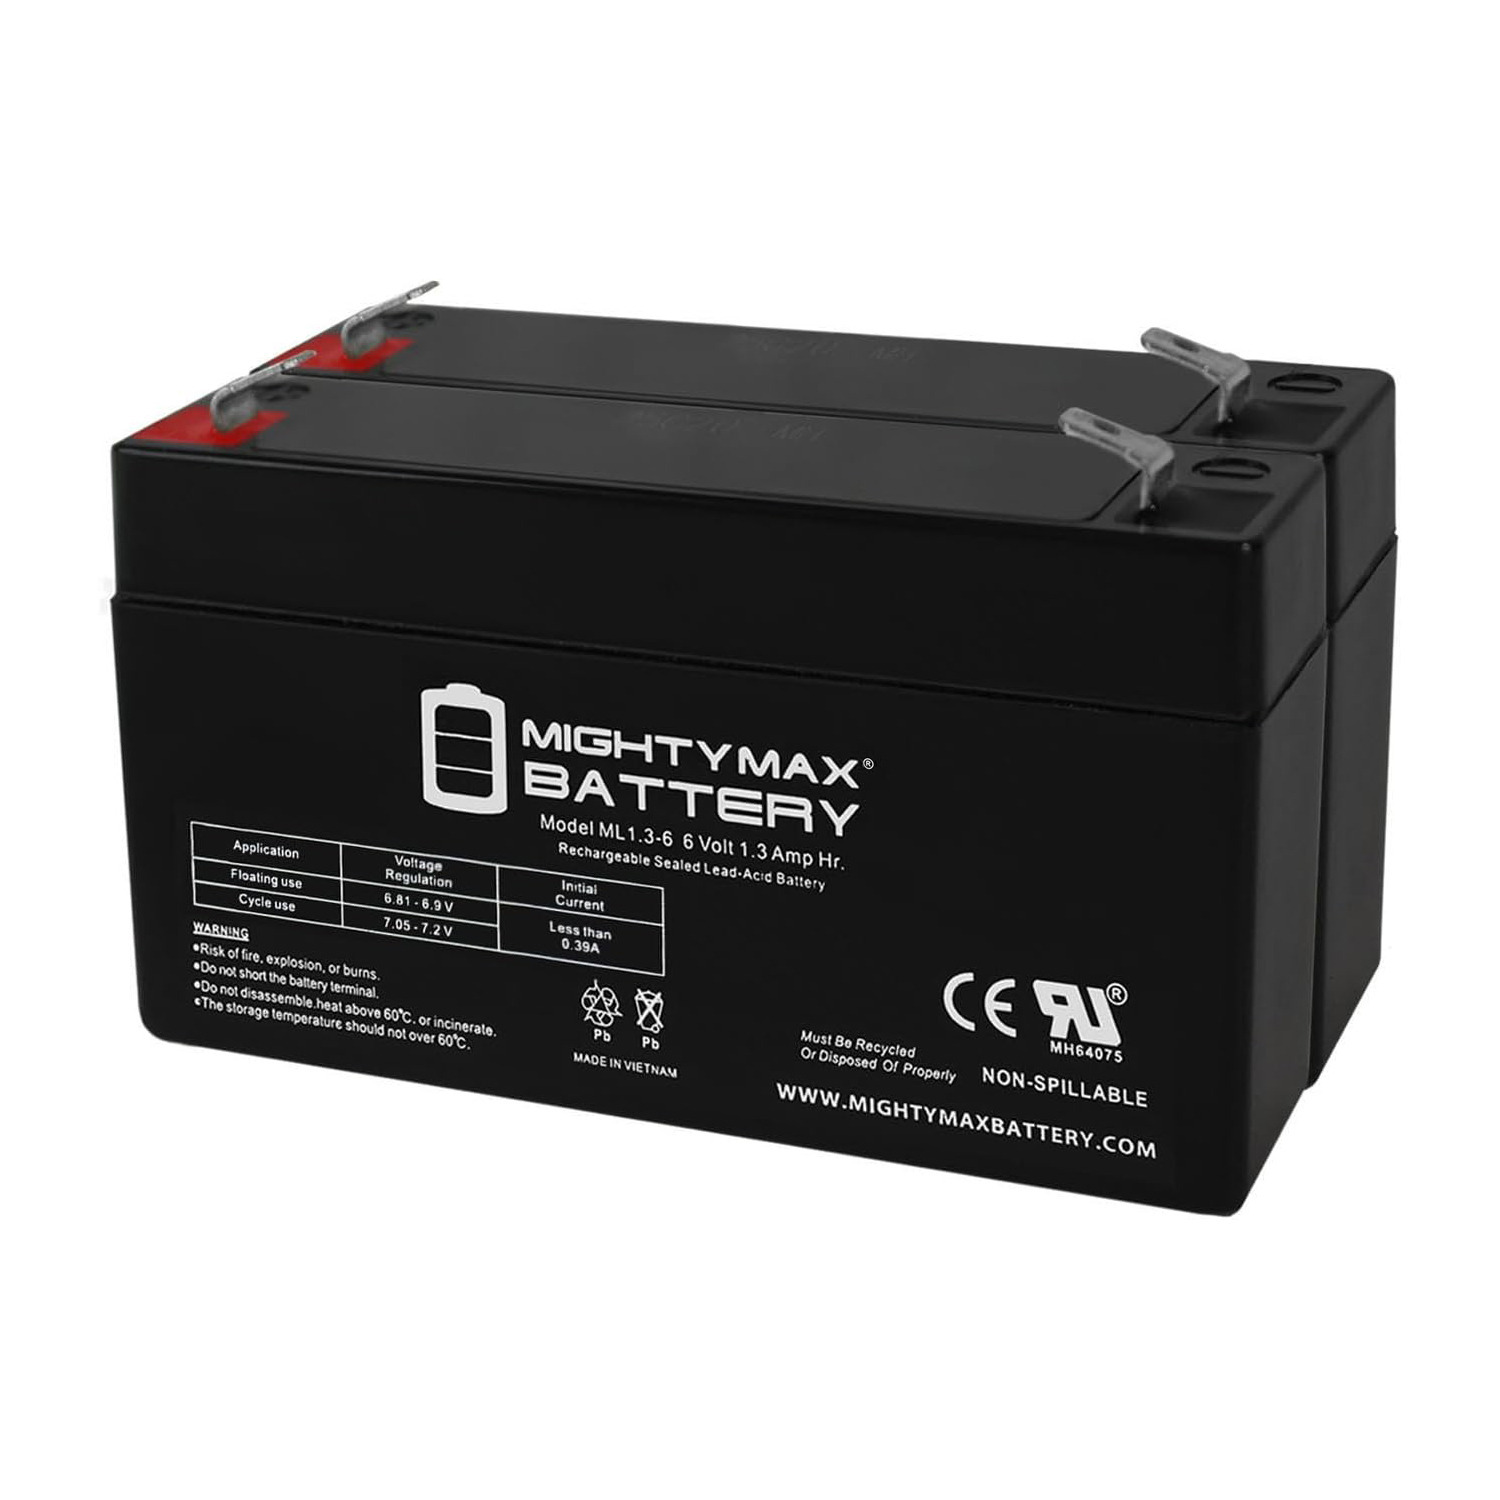 6V 1.3Ah SLA Replacement Battery for Exell FP613 - 2 Pack